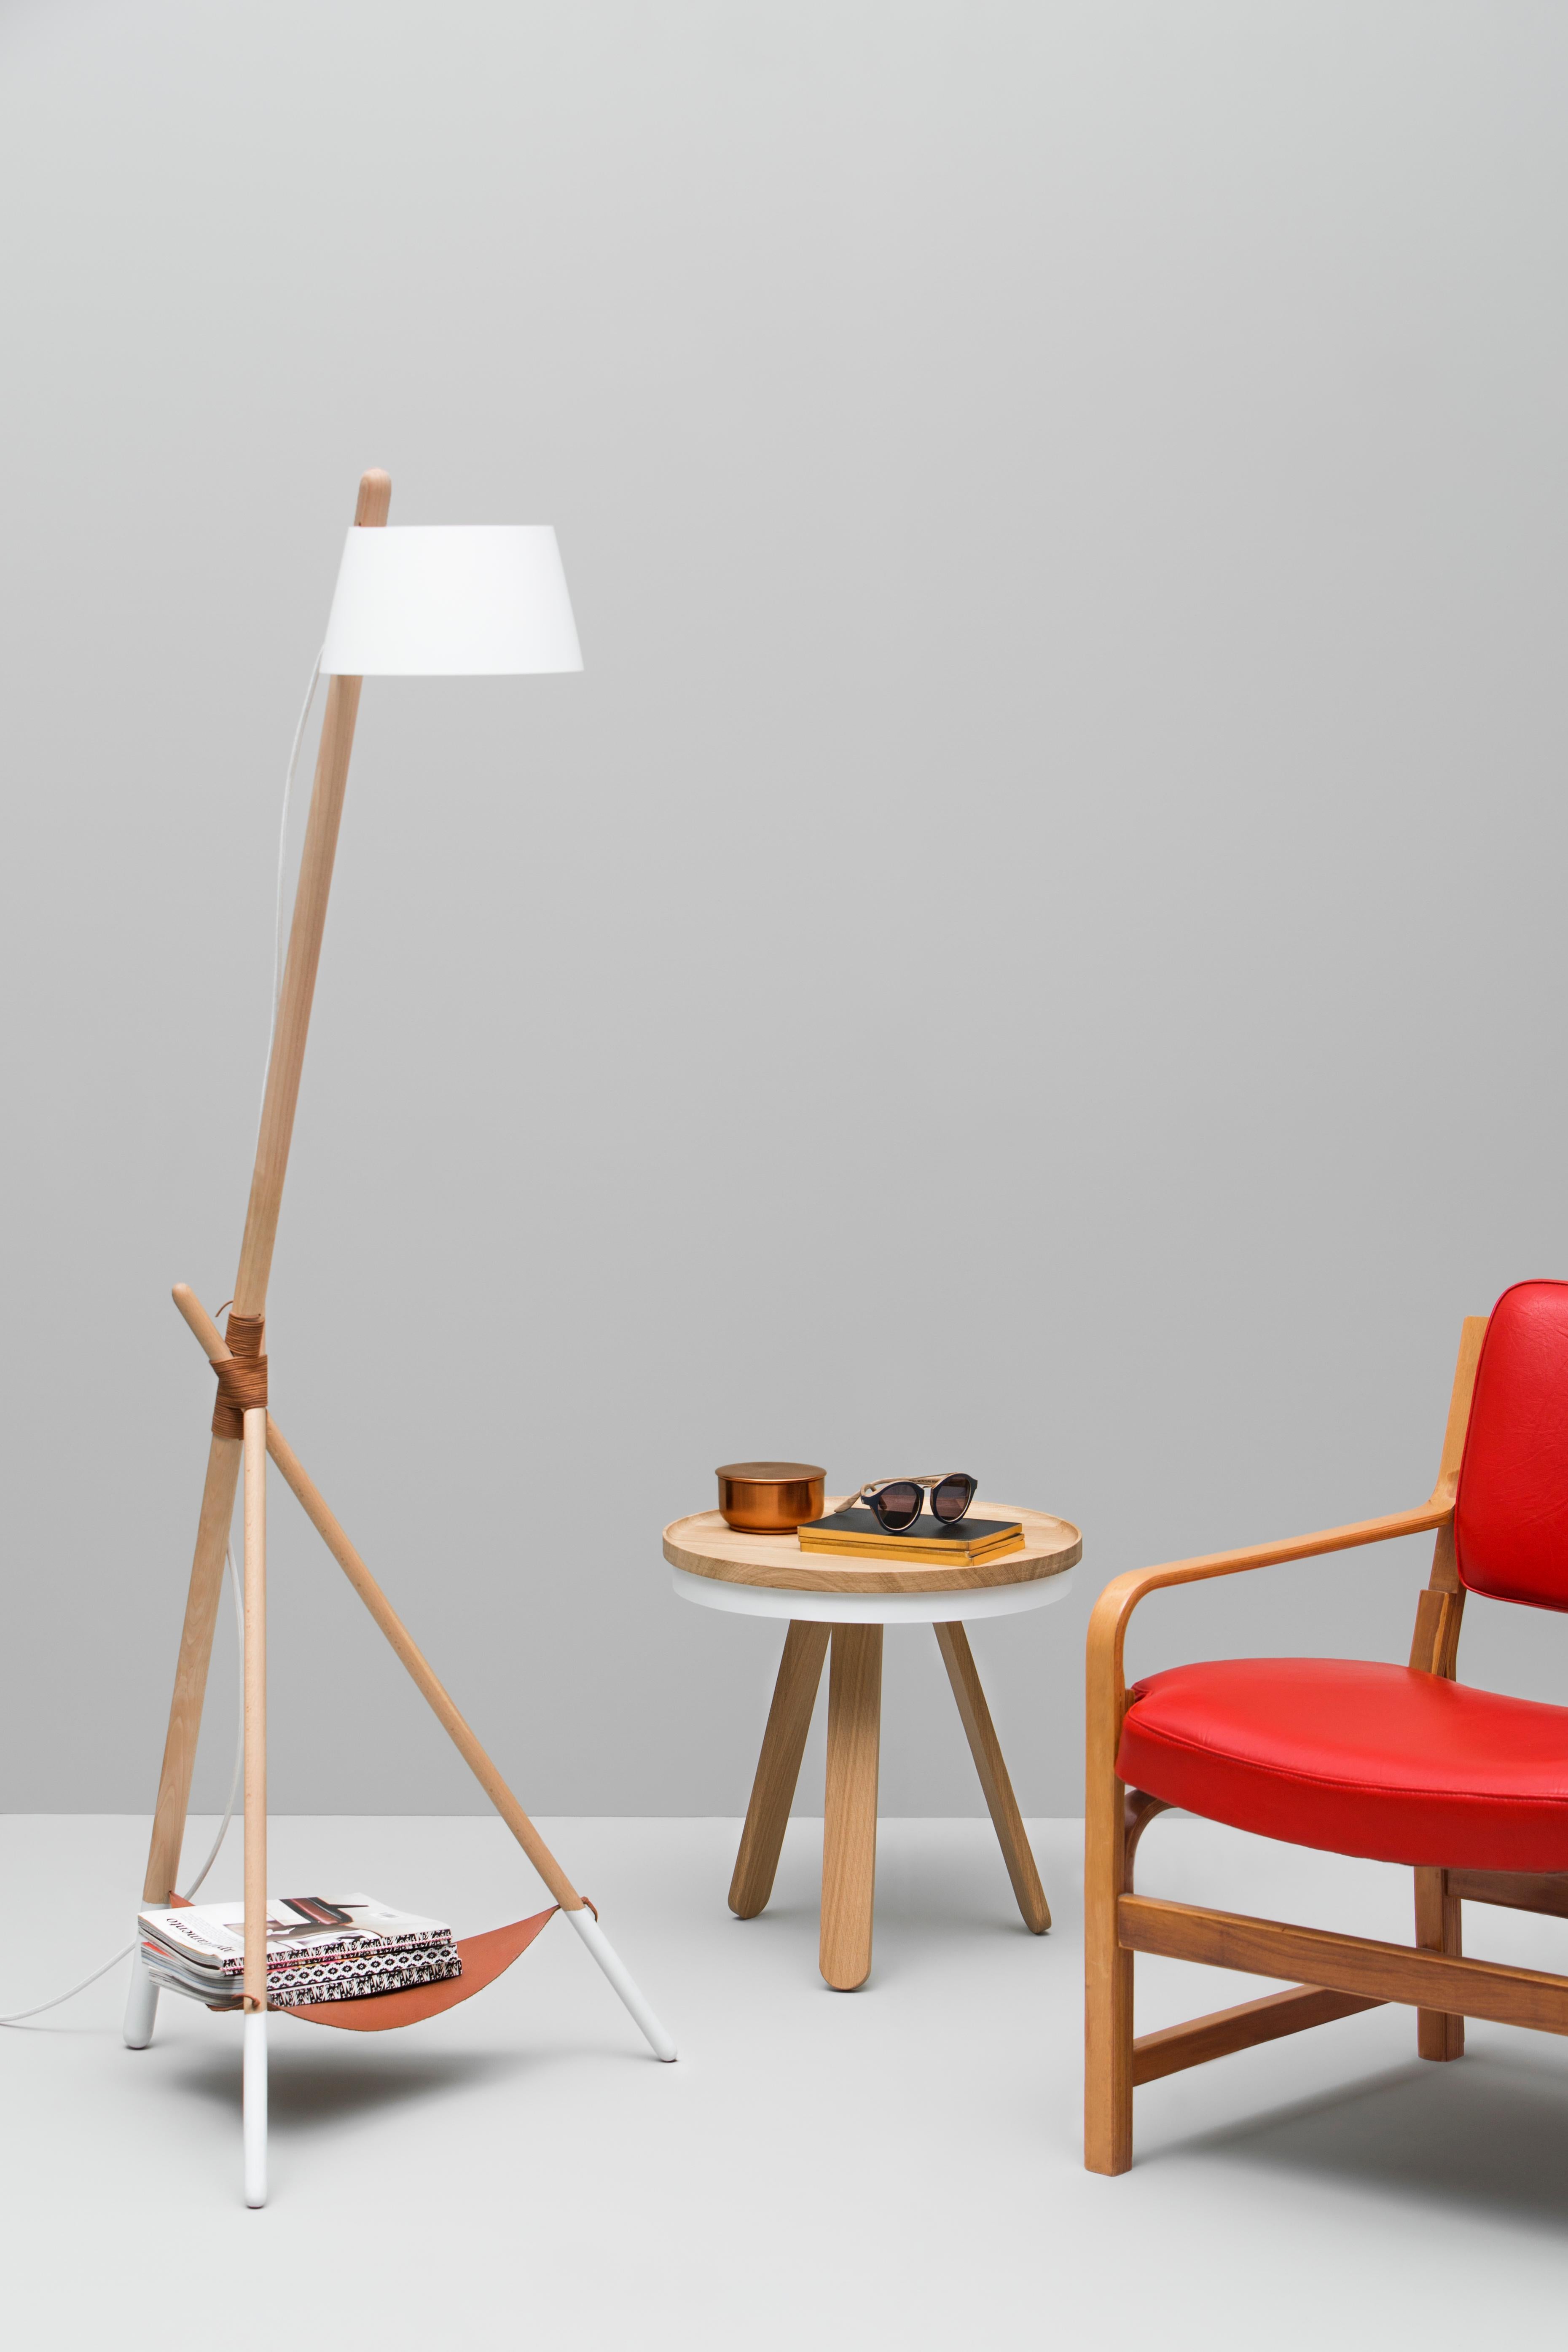 The medium-sized one of the Ka family is a standard standing wooden lamp that radiates direct light as a reading floor lamp. Above all, it follows the philosophy of wooden and minimal furniture of Scandinavian design; similar to the rest of lamps of